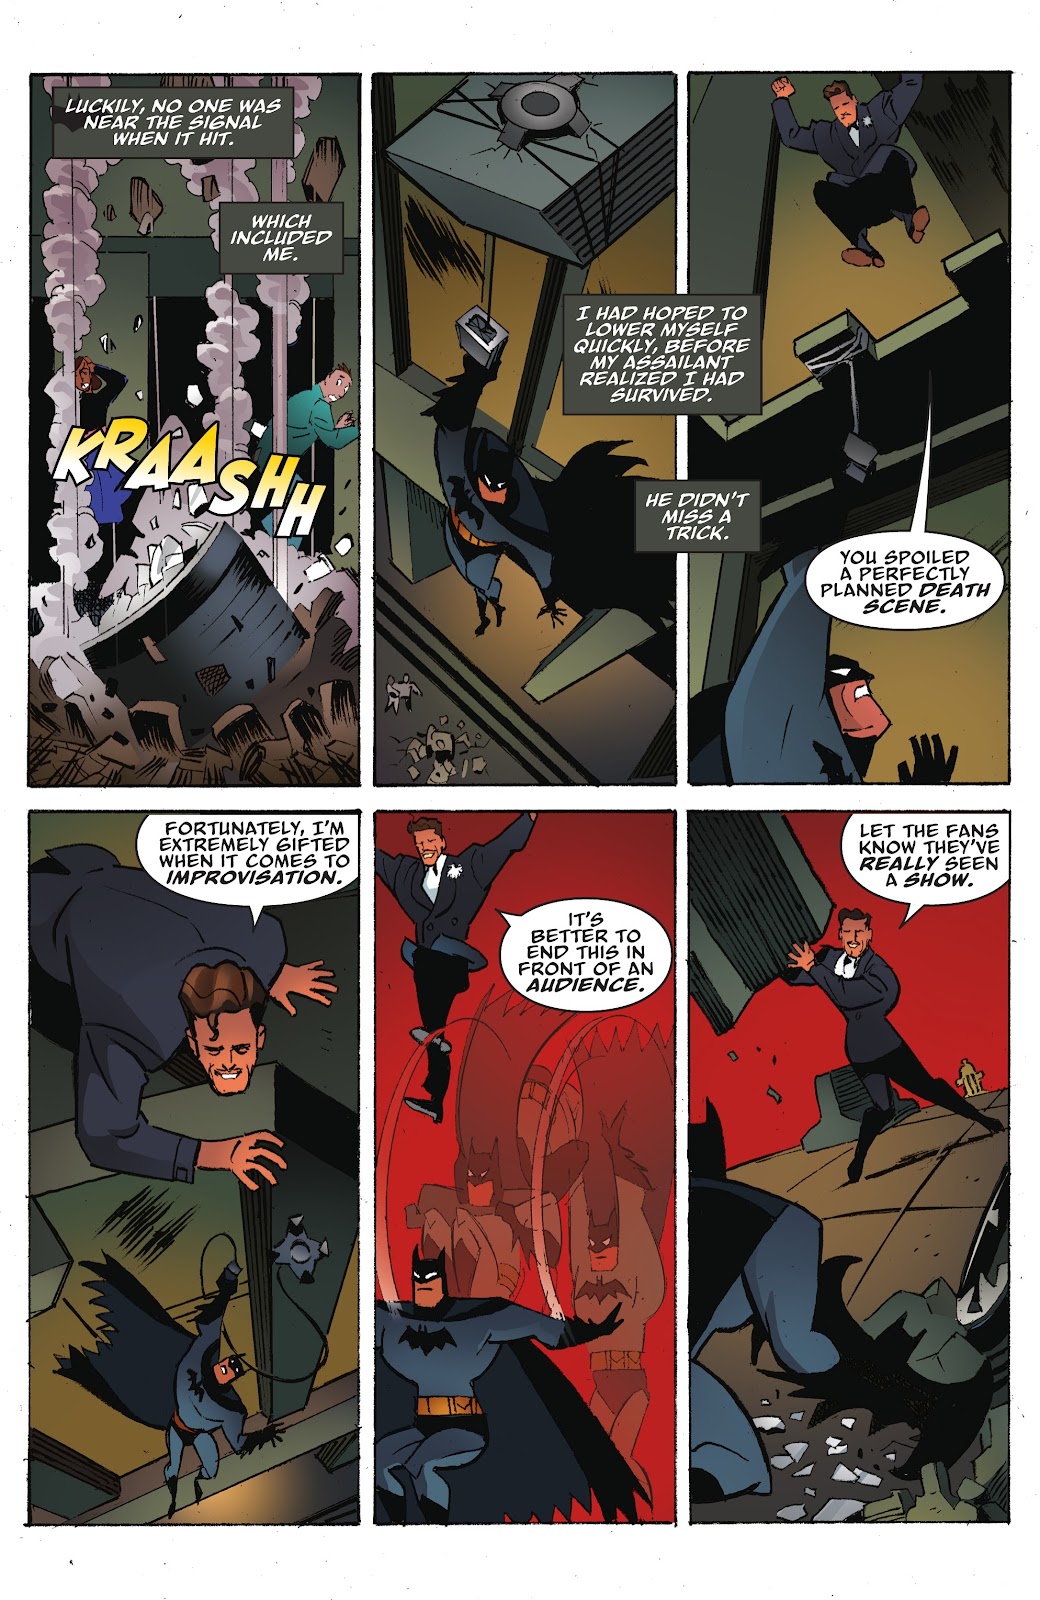 Batman: The Adventures Continue: Season Two issue 6 - Page 13